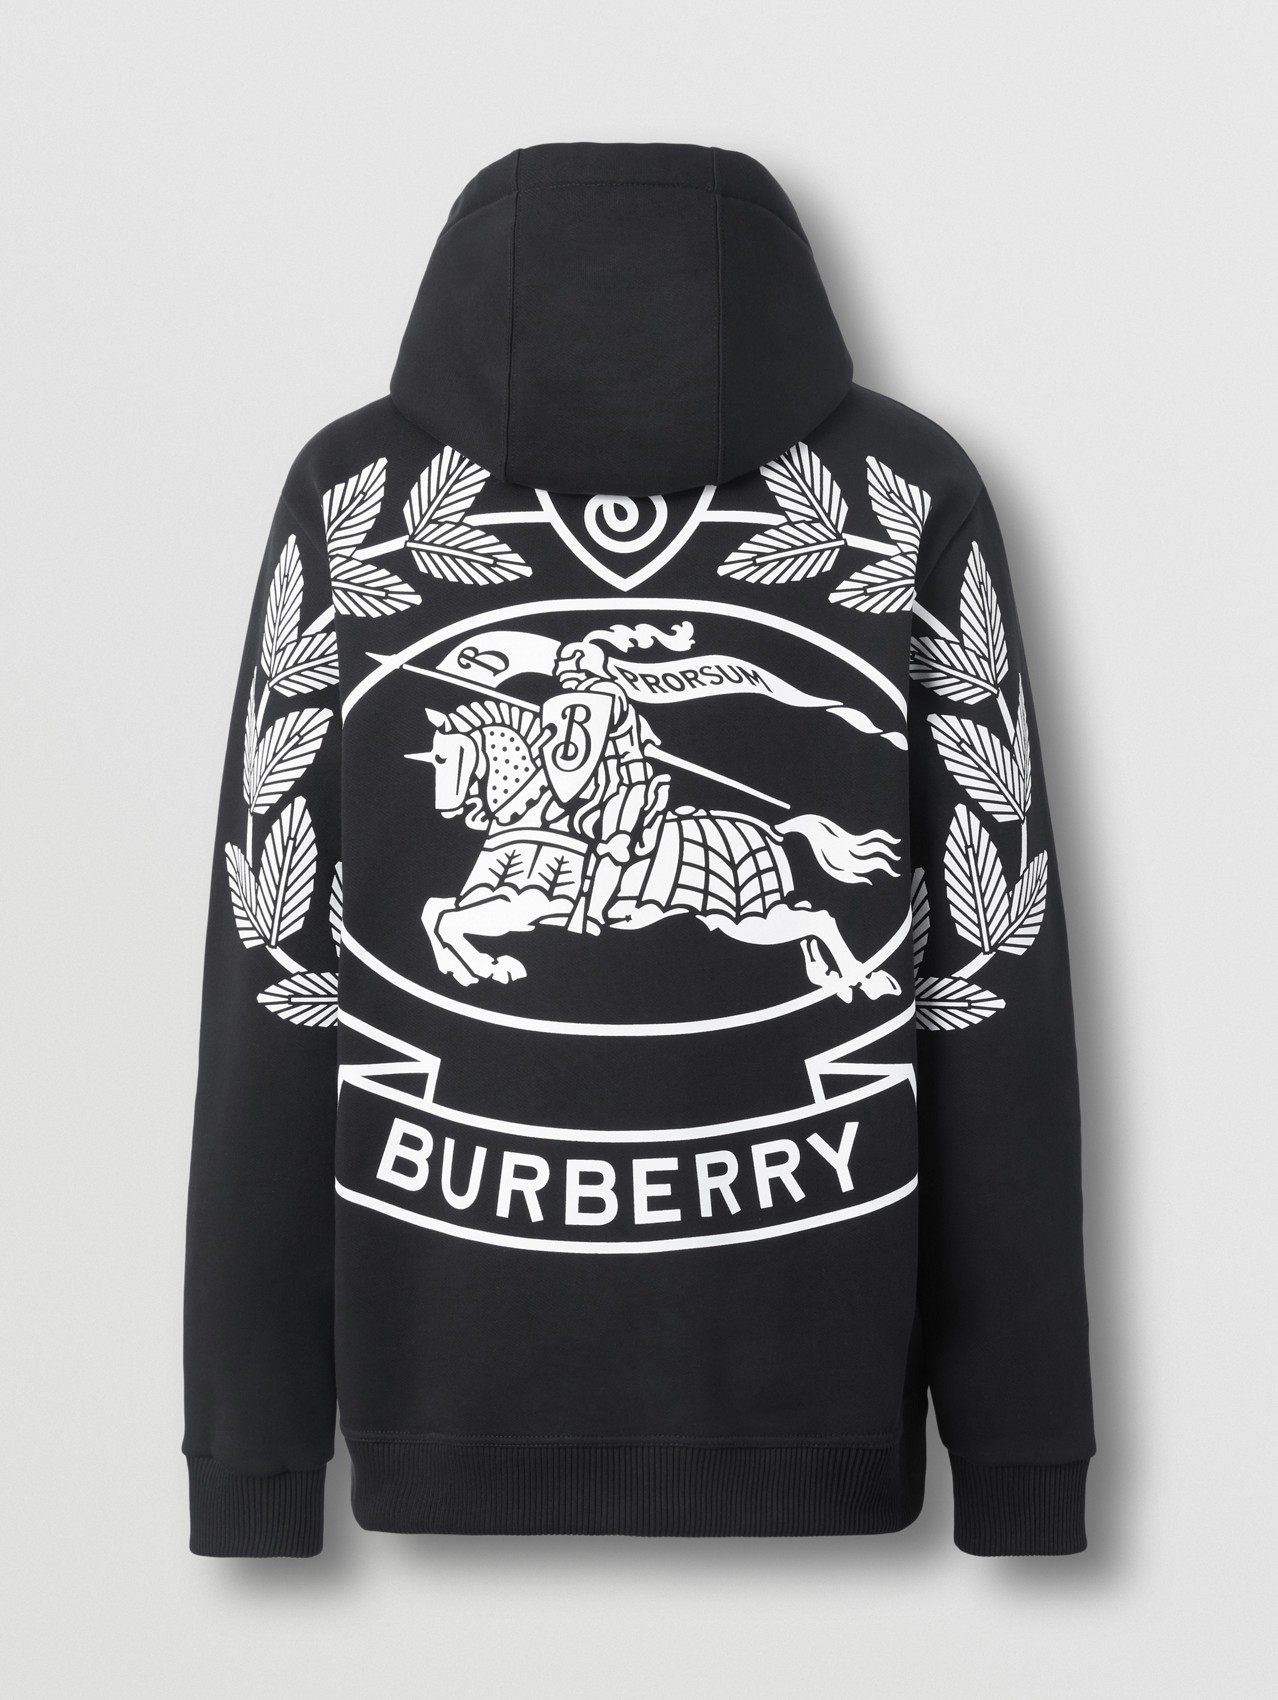 gym and workout clothes Burberry Activewear gym and workout clothes Burberry Shark Printed Hooded Sweatshirt in Black for Men Mens Activewear 